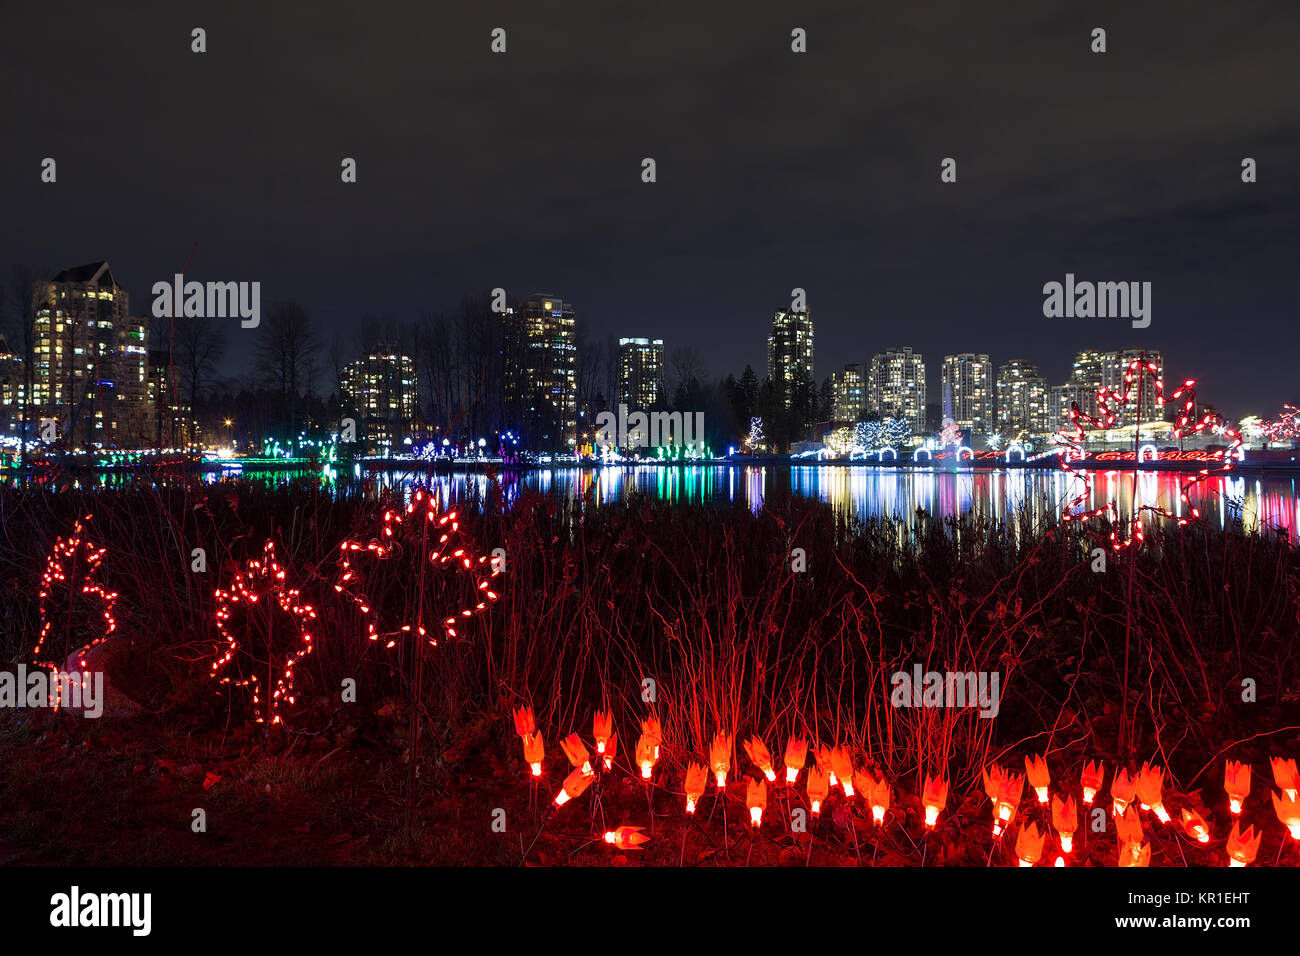 Christmas lights decoration along Lafarge Lake in city center of Coquitlam British Columbia Canada at night Stock Photo